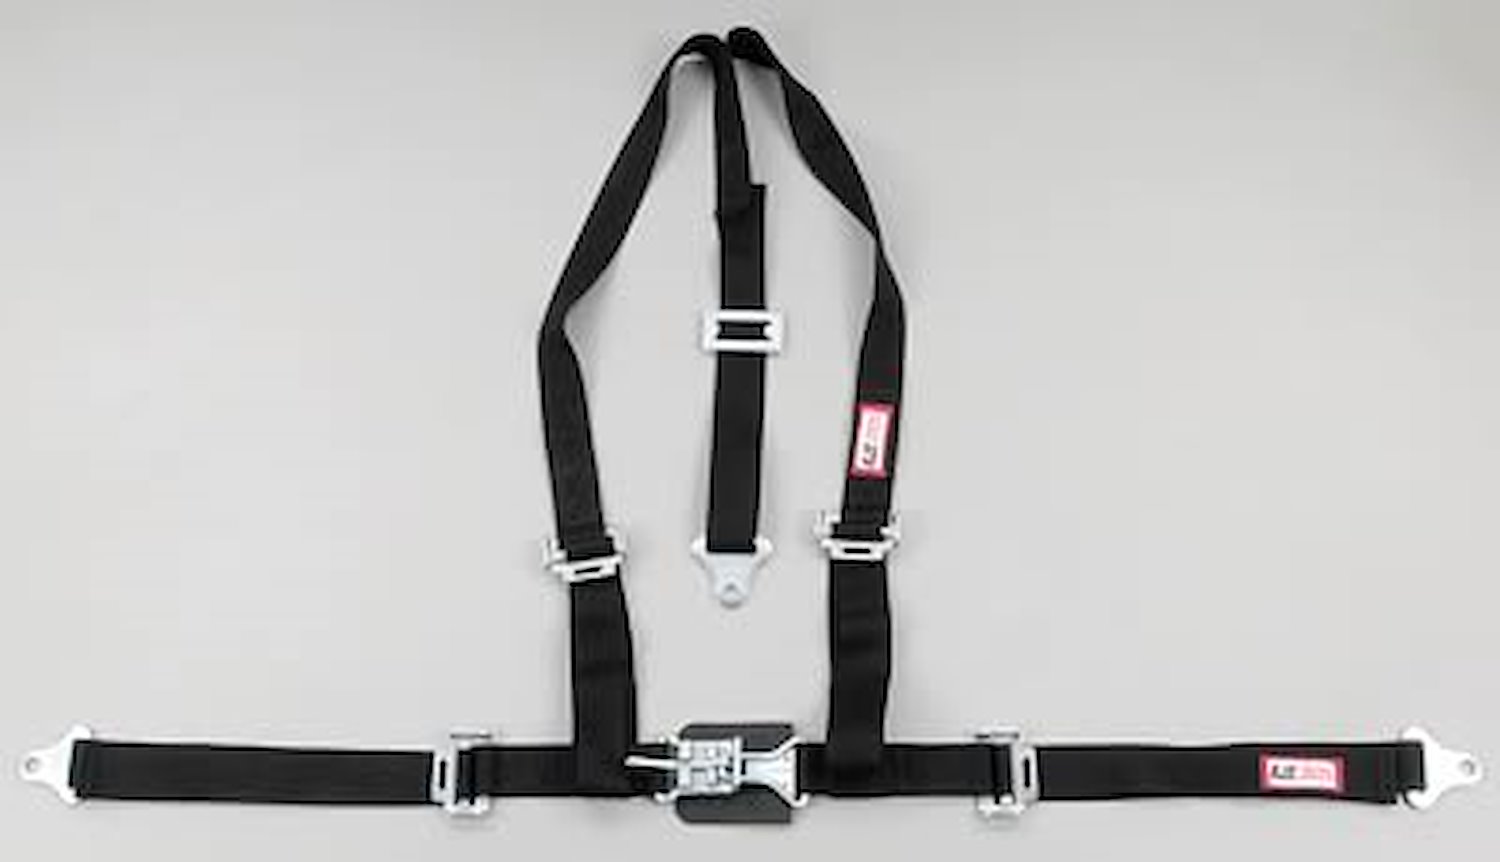 NON-SFI L&L HARNESS 3 PULL DOWN Lap Belt w/adjuster 2 S.H. Y FLOOR Mount w/STERNUM STRAP ALL WRAP ENDS HOT PINK